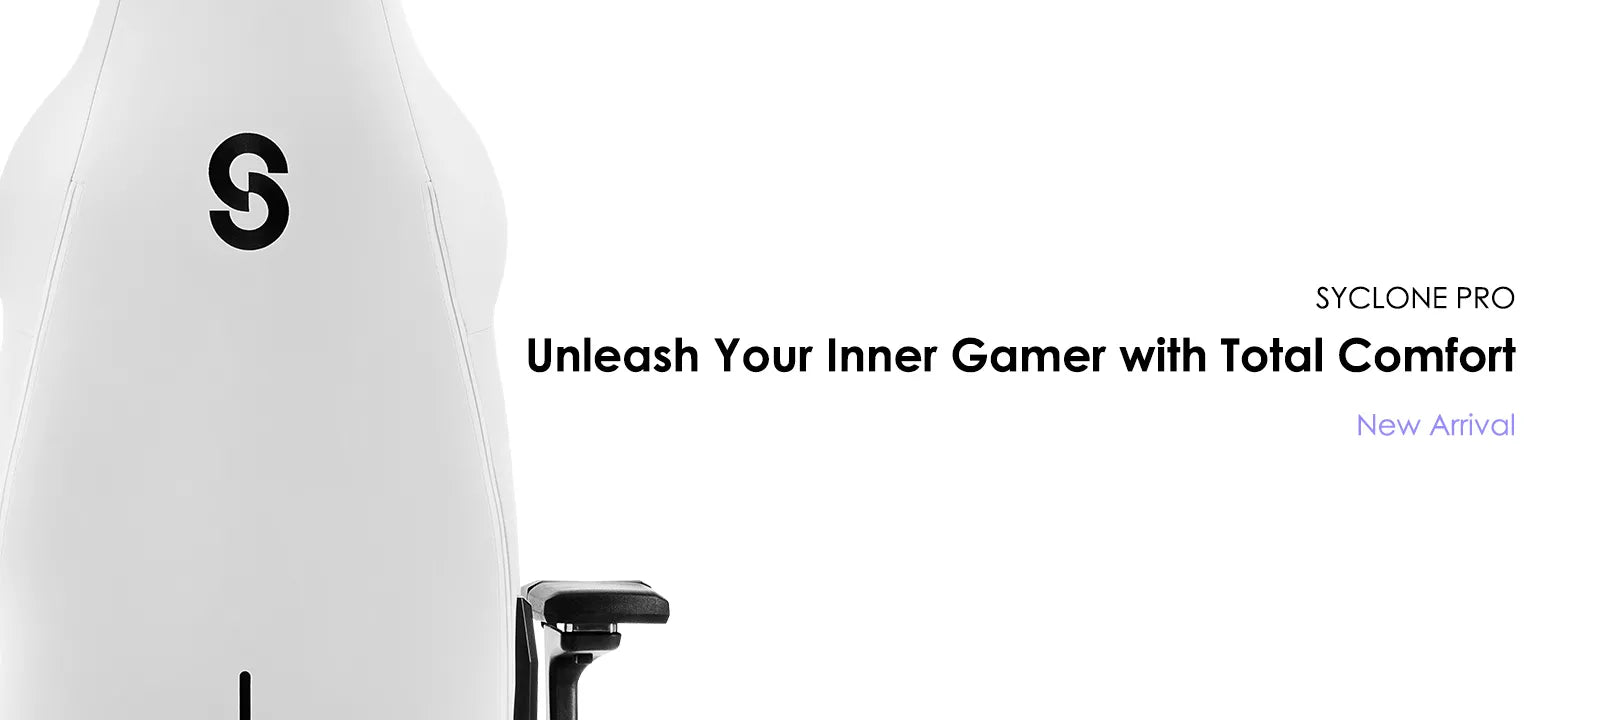 Back view of the white SYCLONE PRO gaming chair with a black 'S' logo.